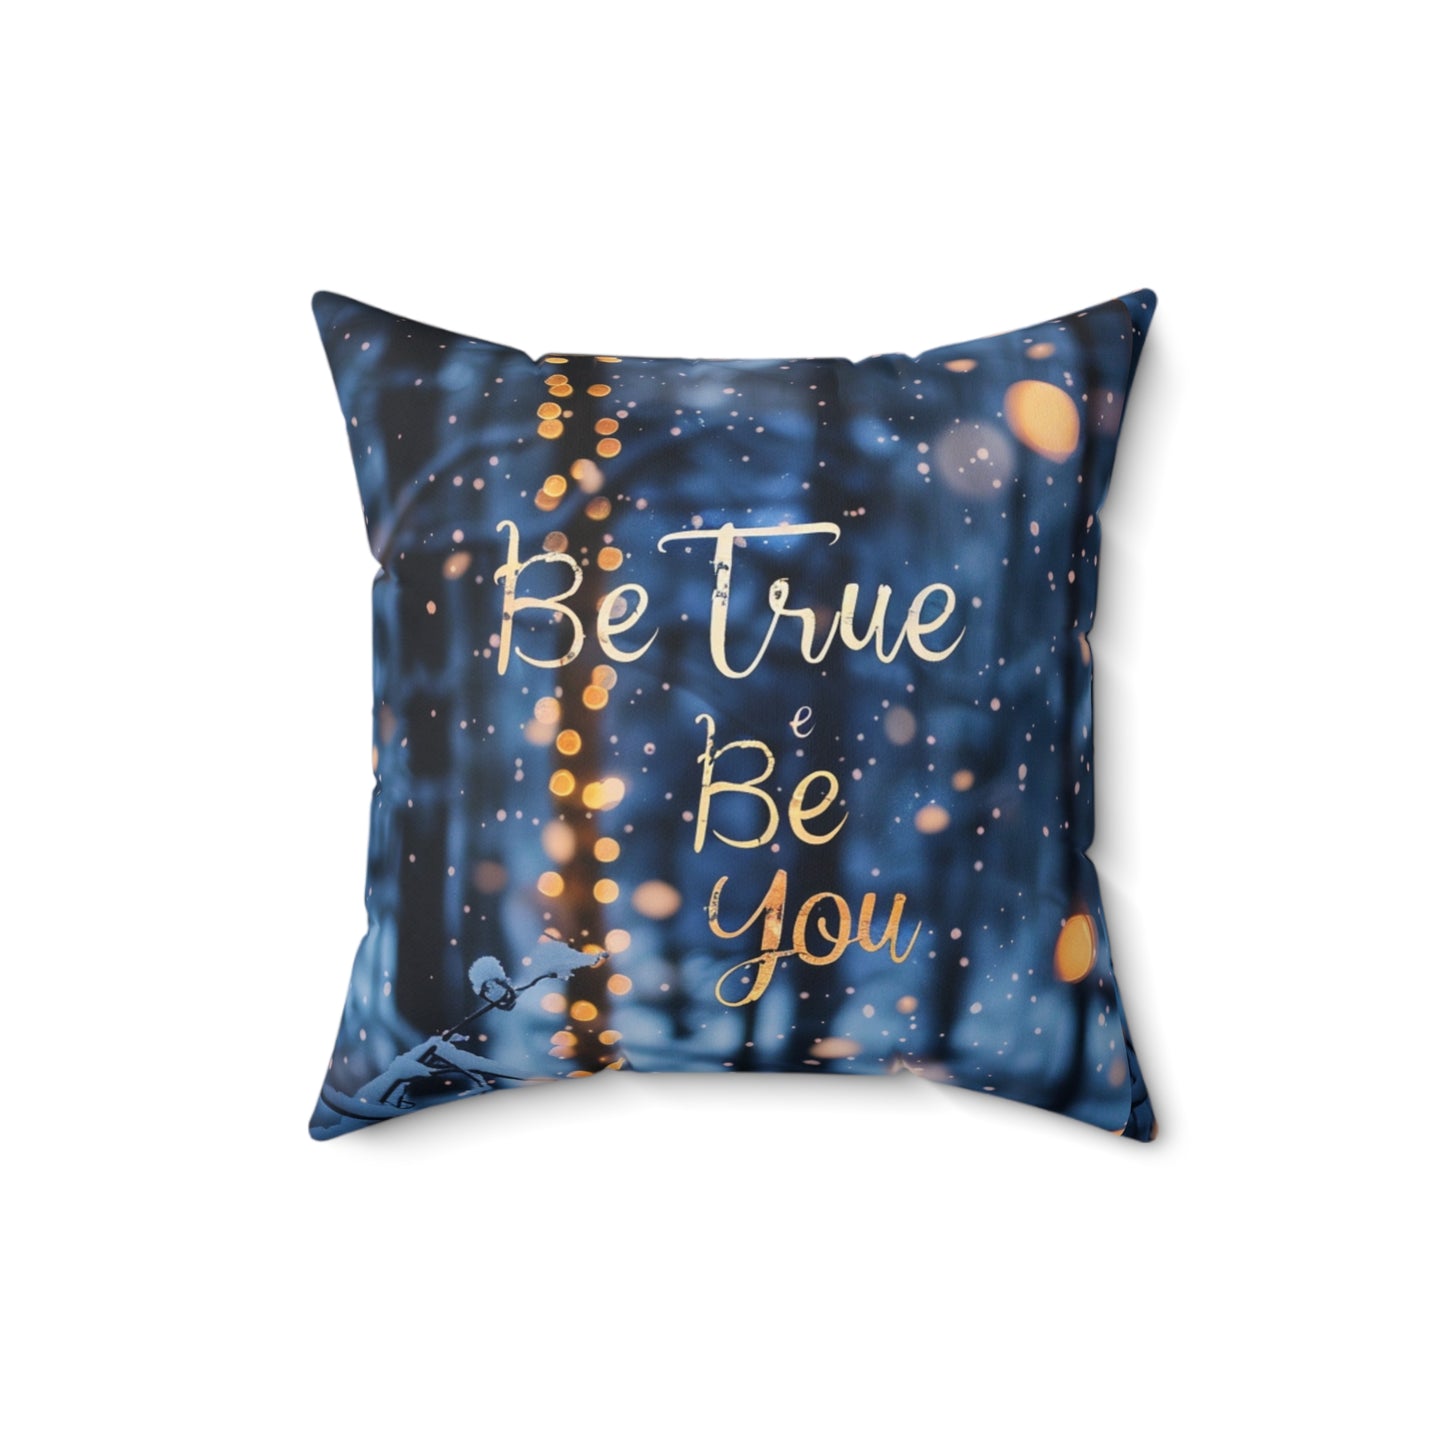 Spun Polyester Square Pillow - Be true be you